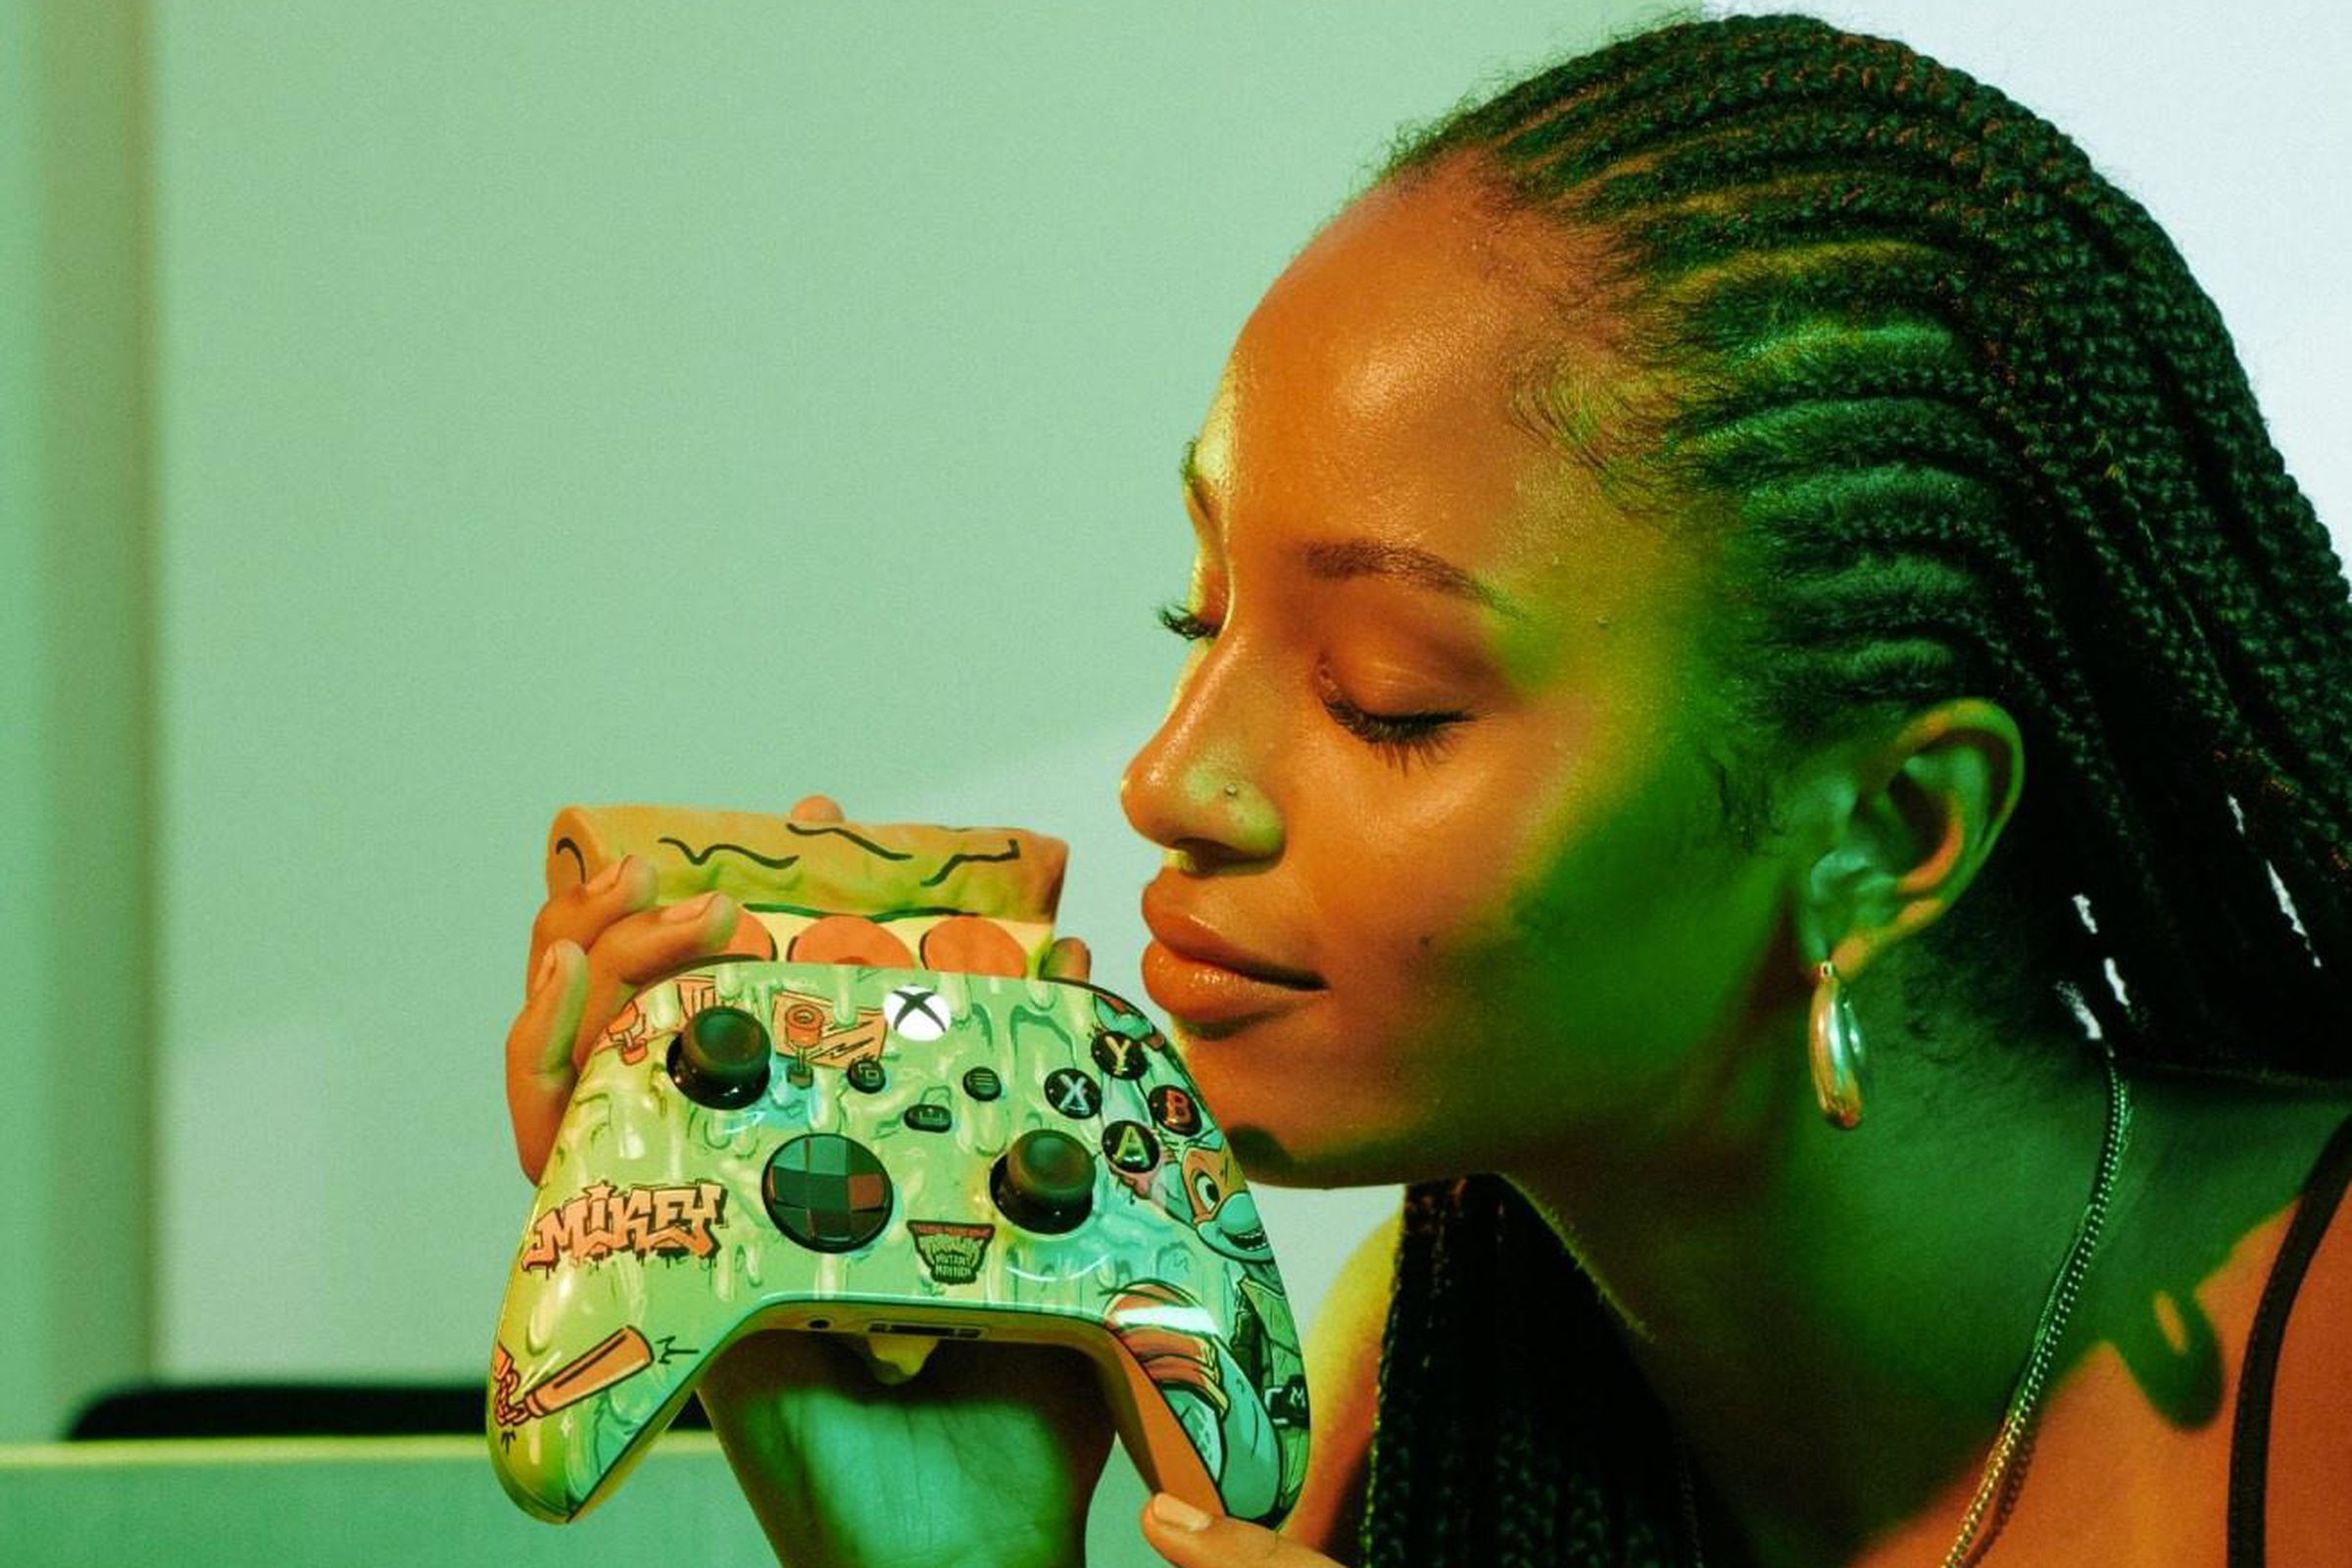 The pizza-scented Xbox controller